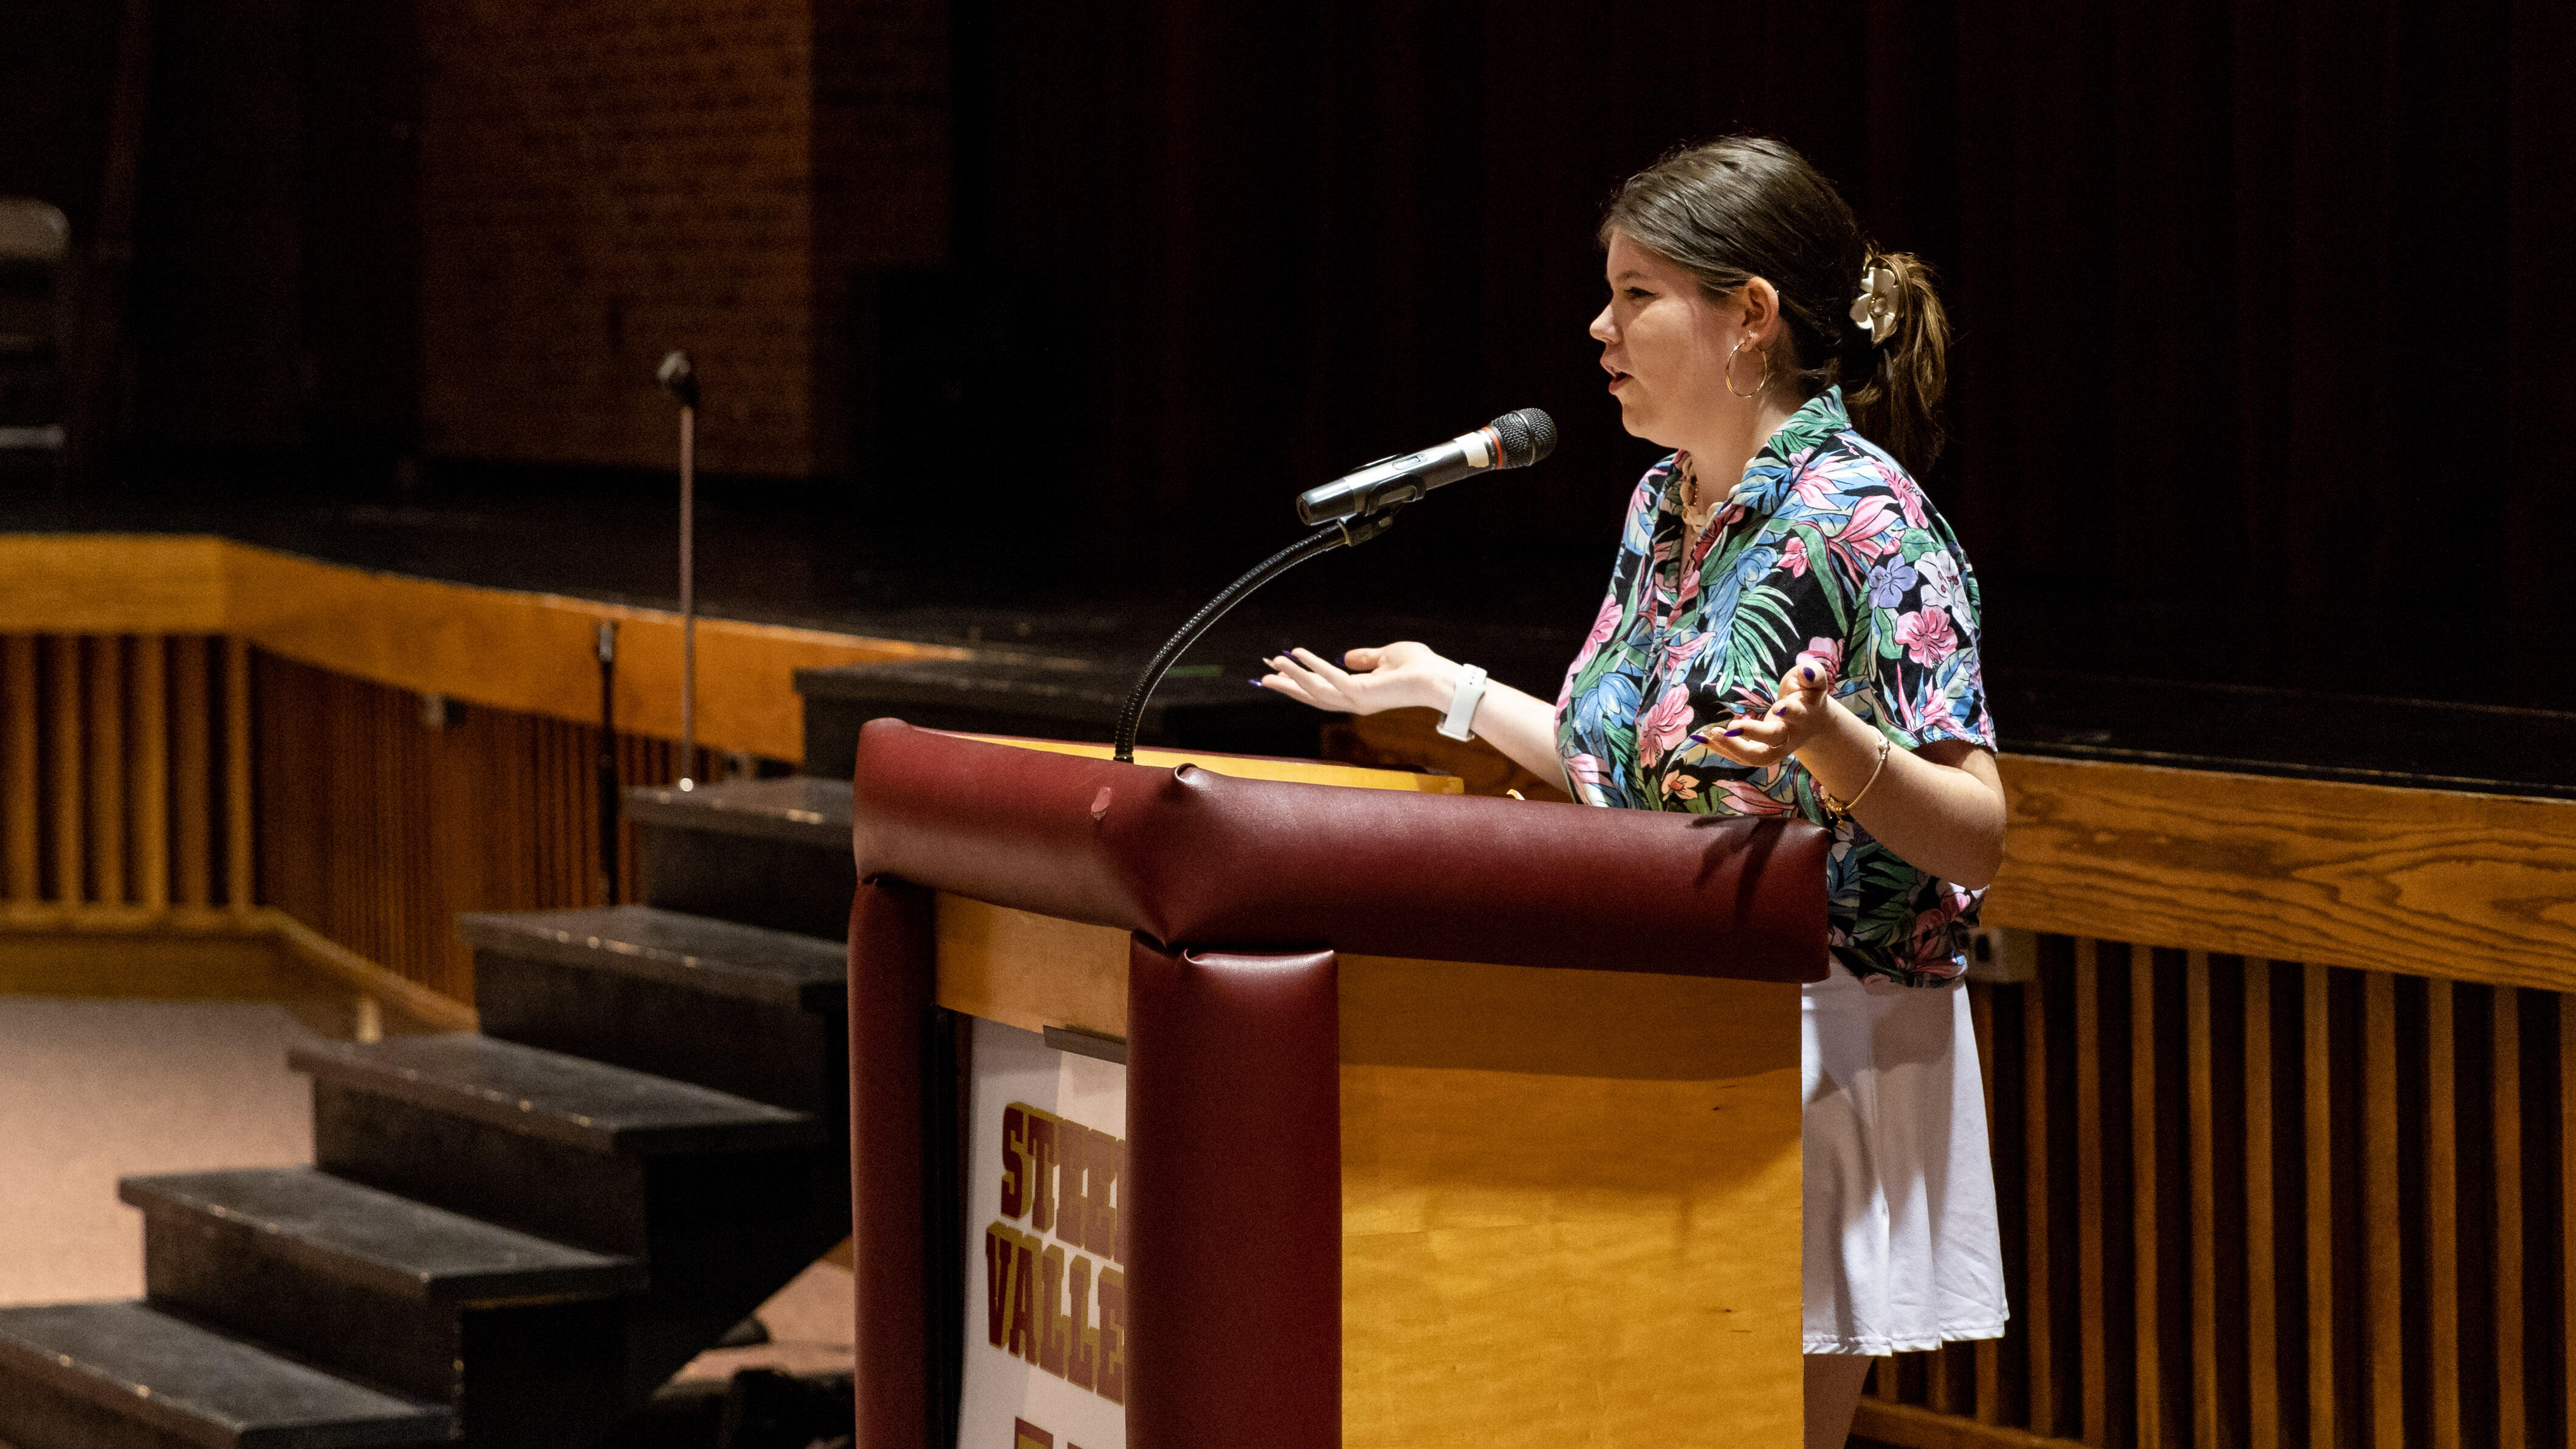 A young woman stands at a podium in an auditorium and addresses the seated audience.